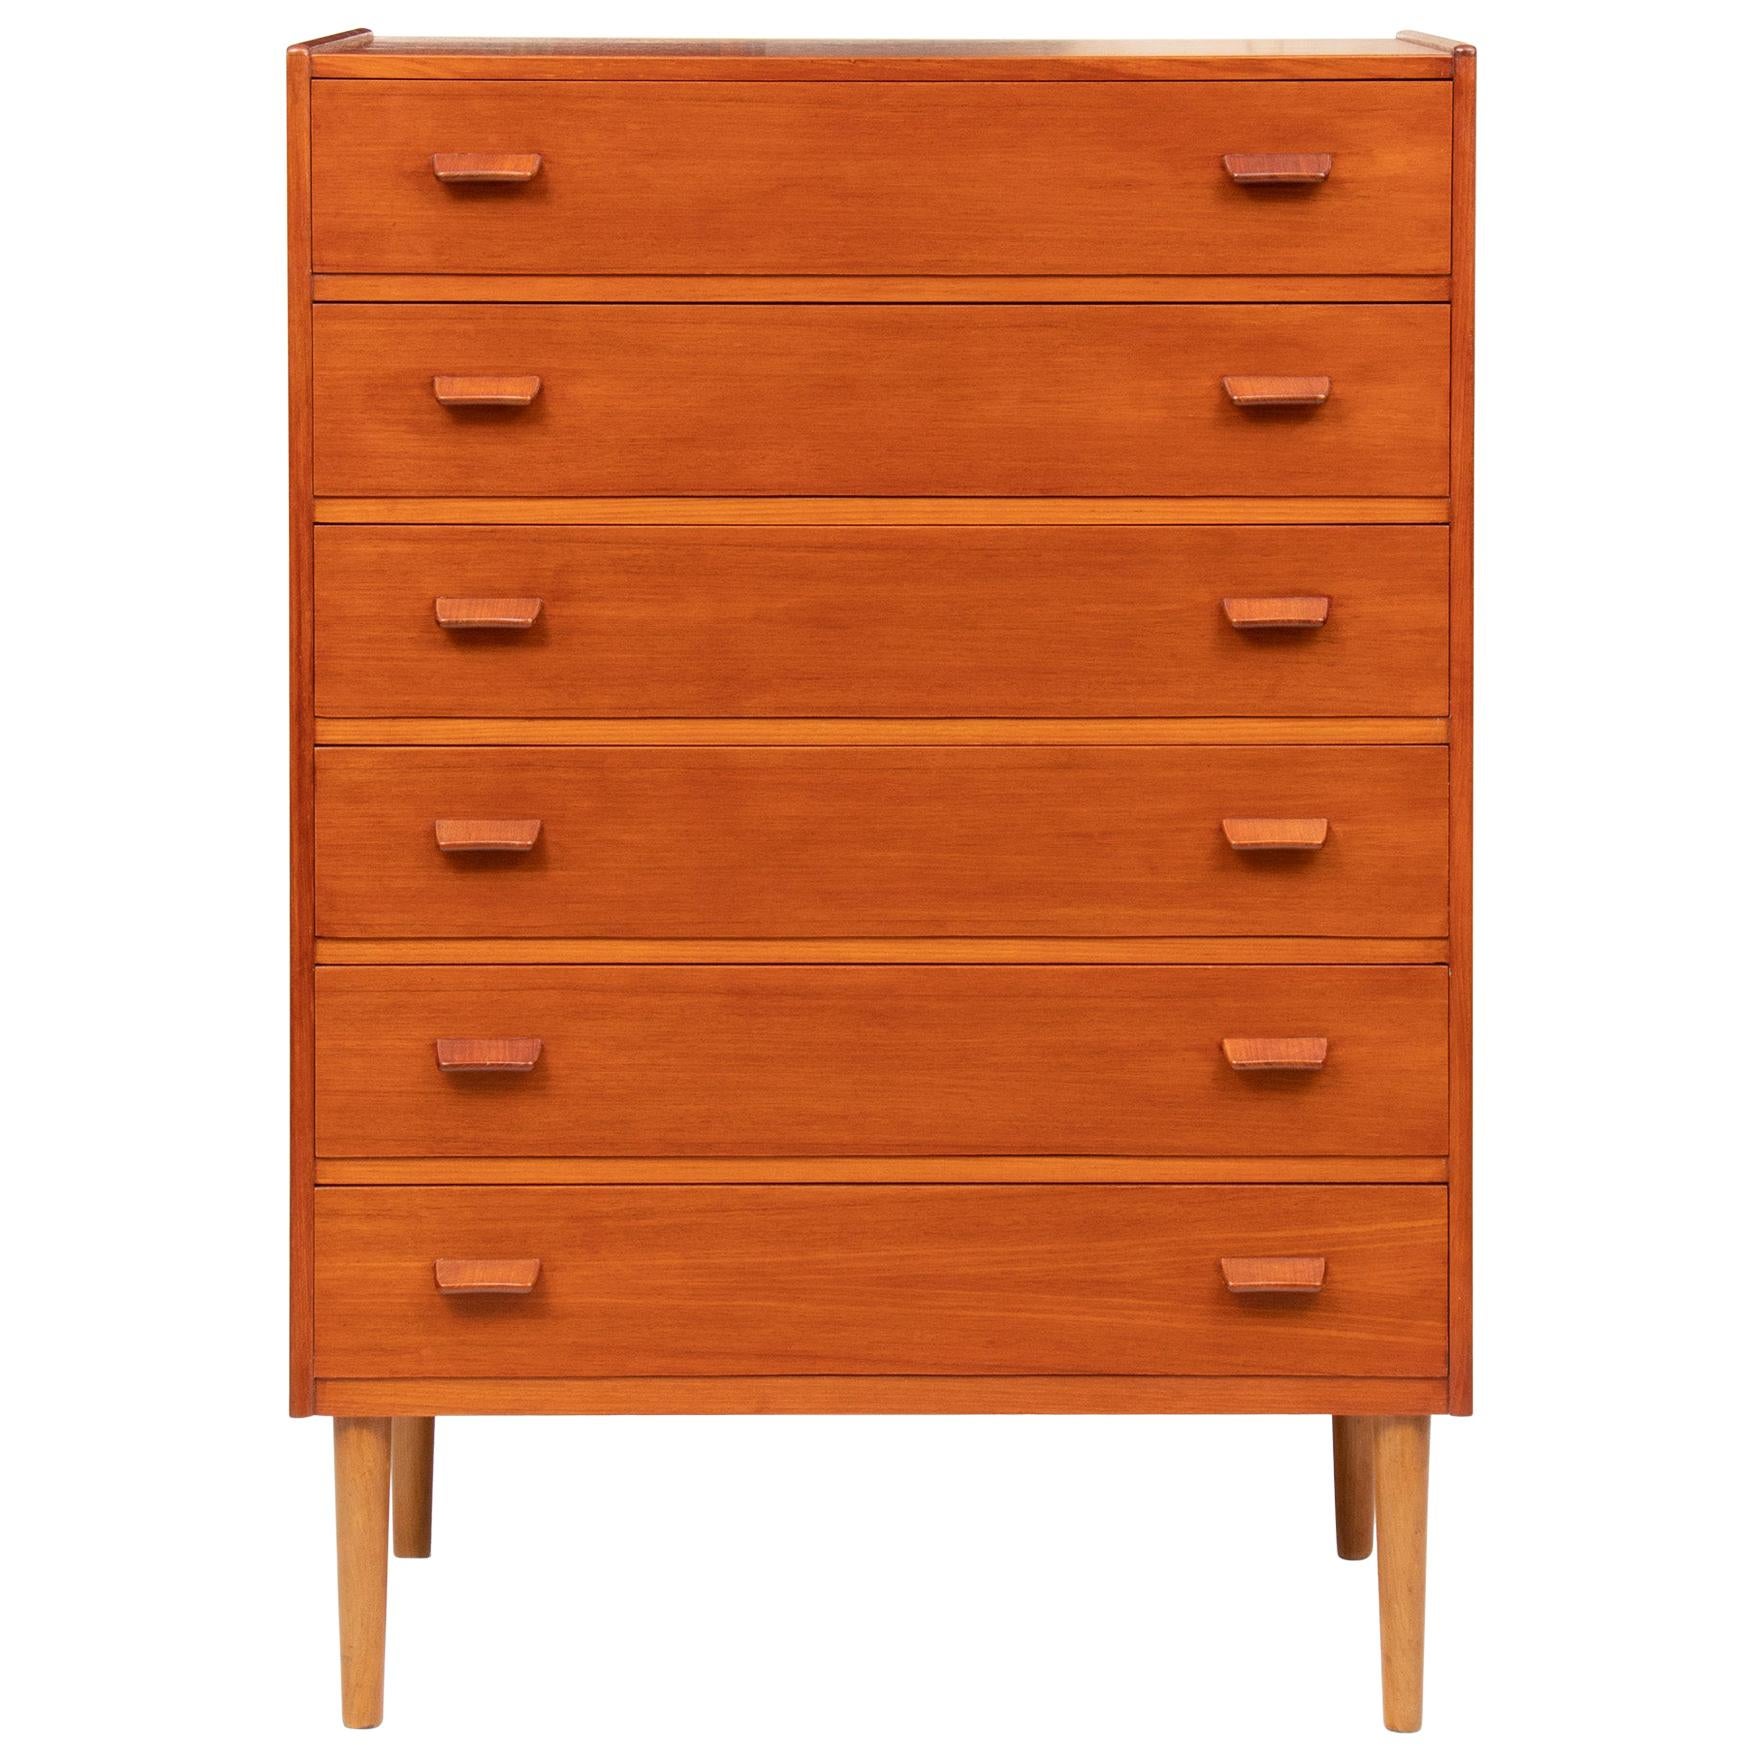 Midcentury Teak Chest of Drawers by Poul Volther for Heals, circa 1960 For Sale